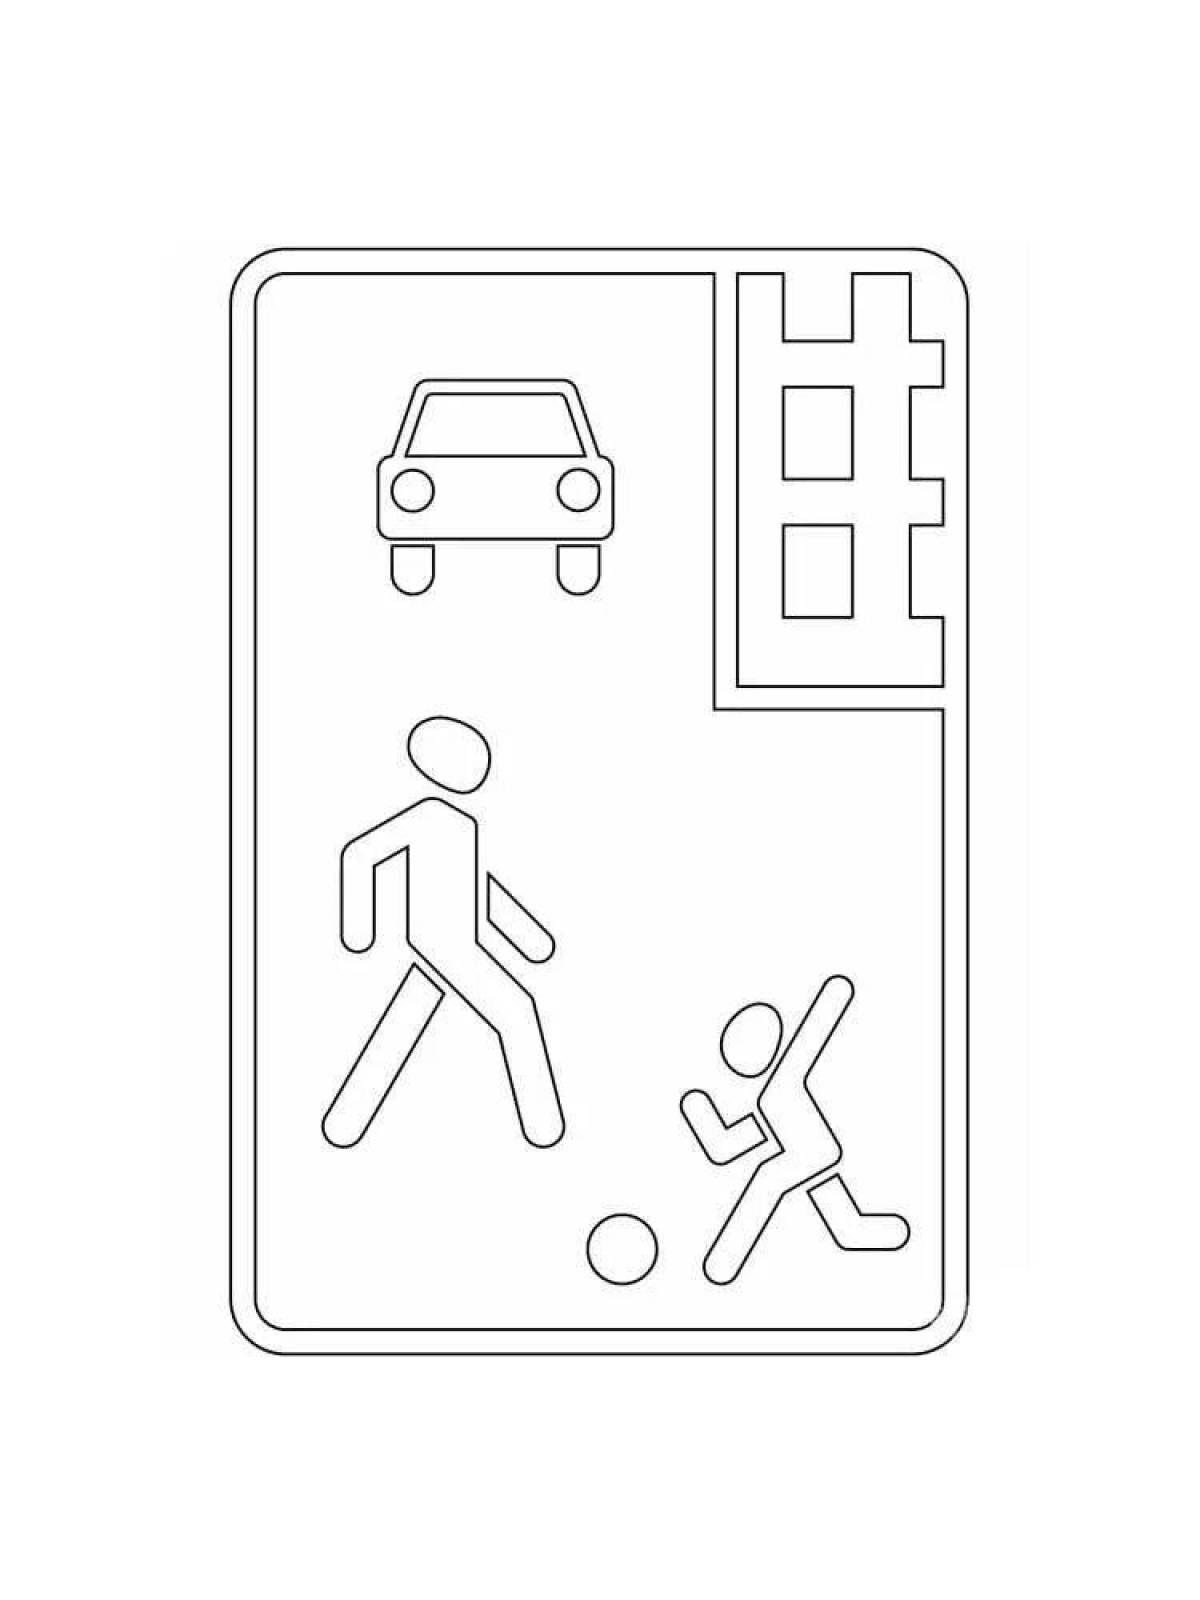 Fun caution kids sign coloring page